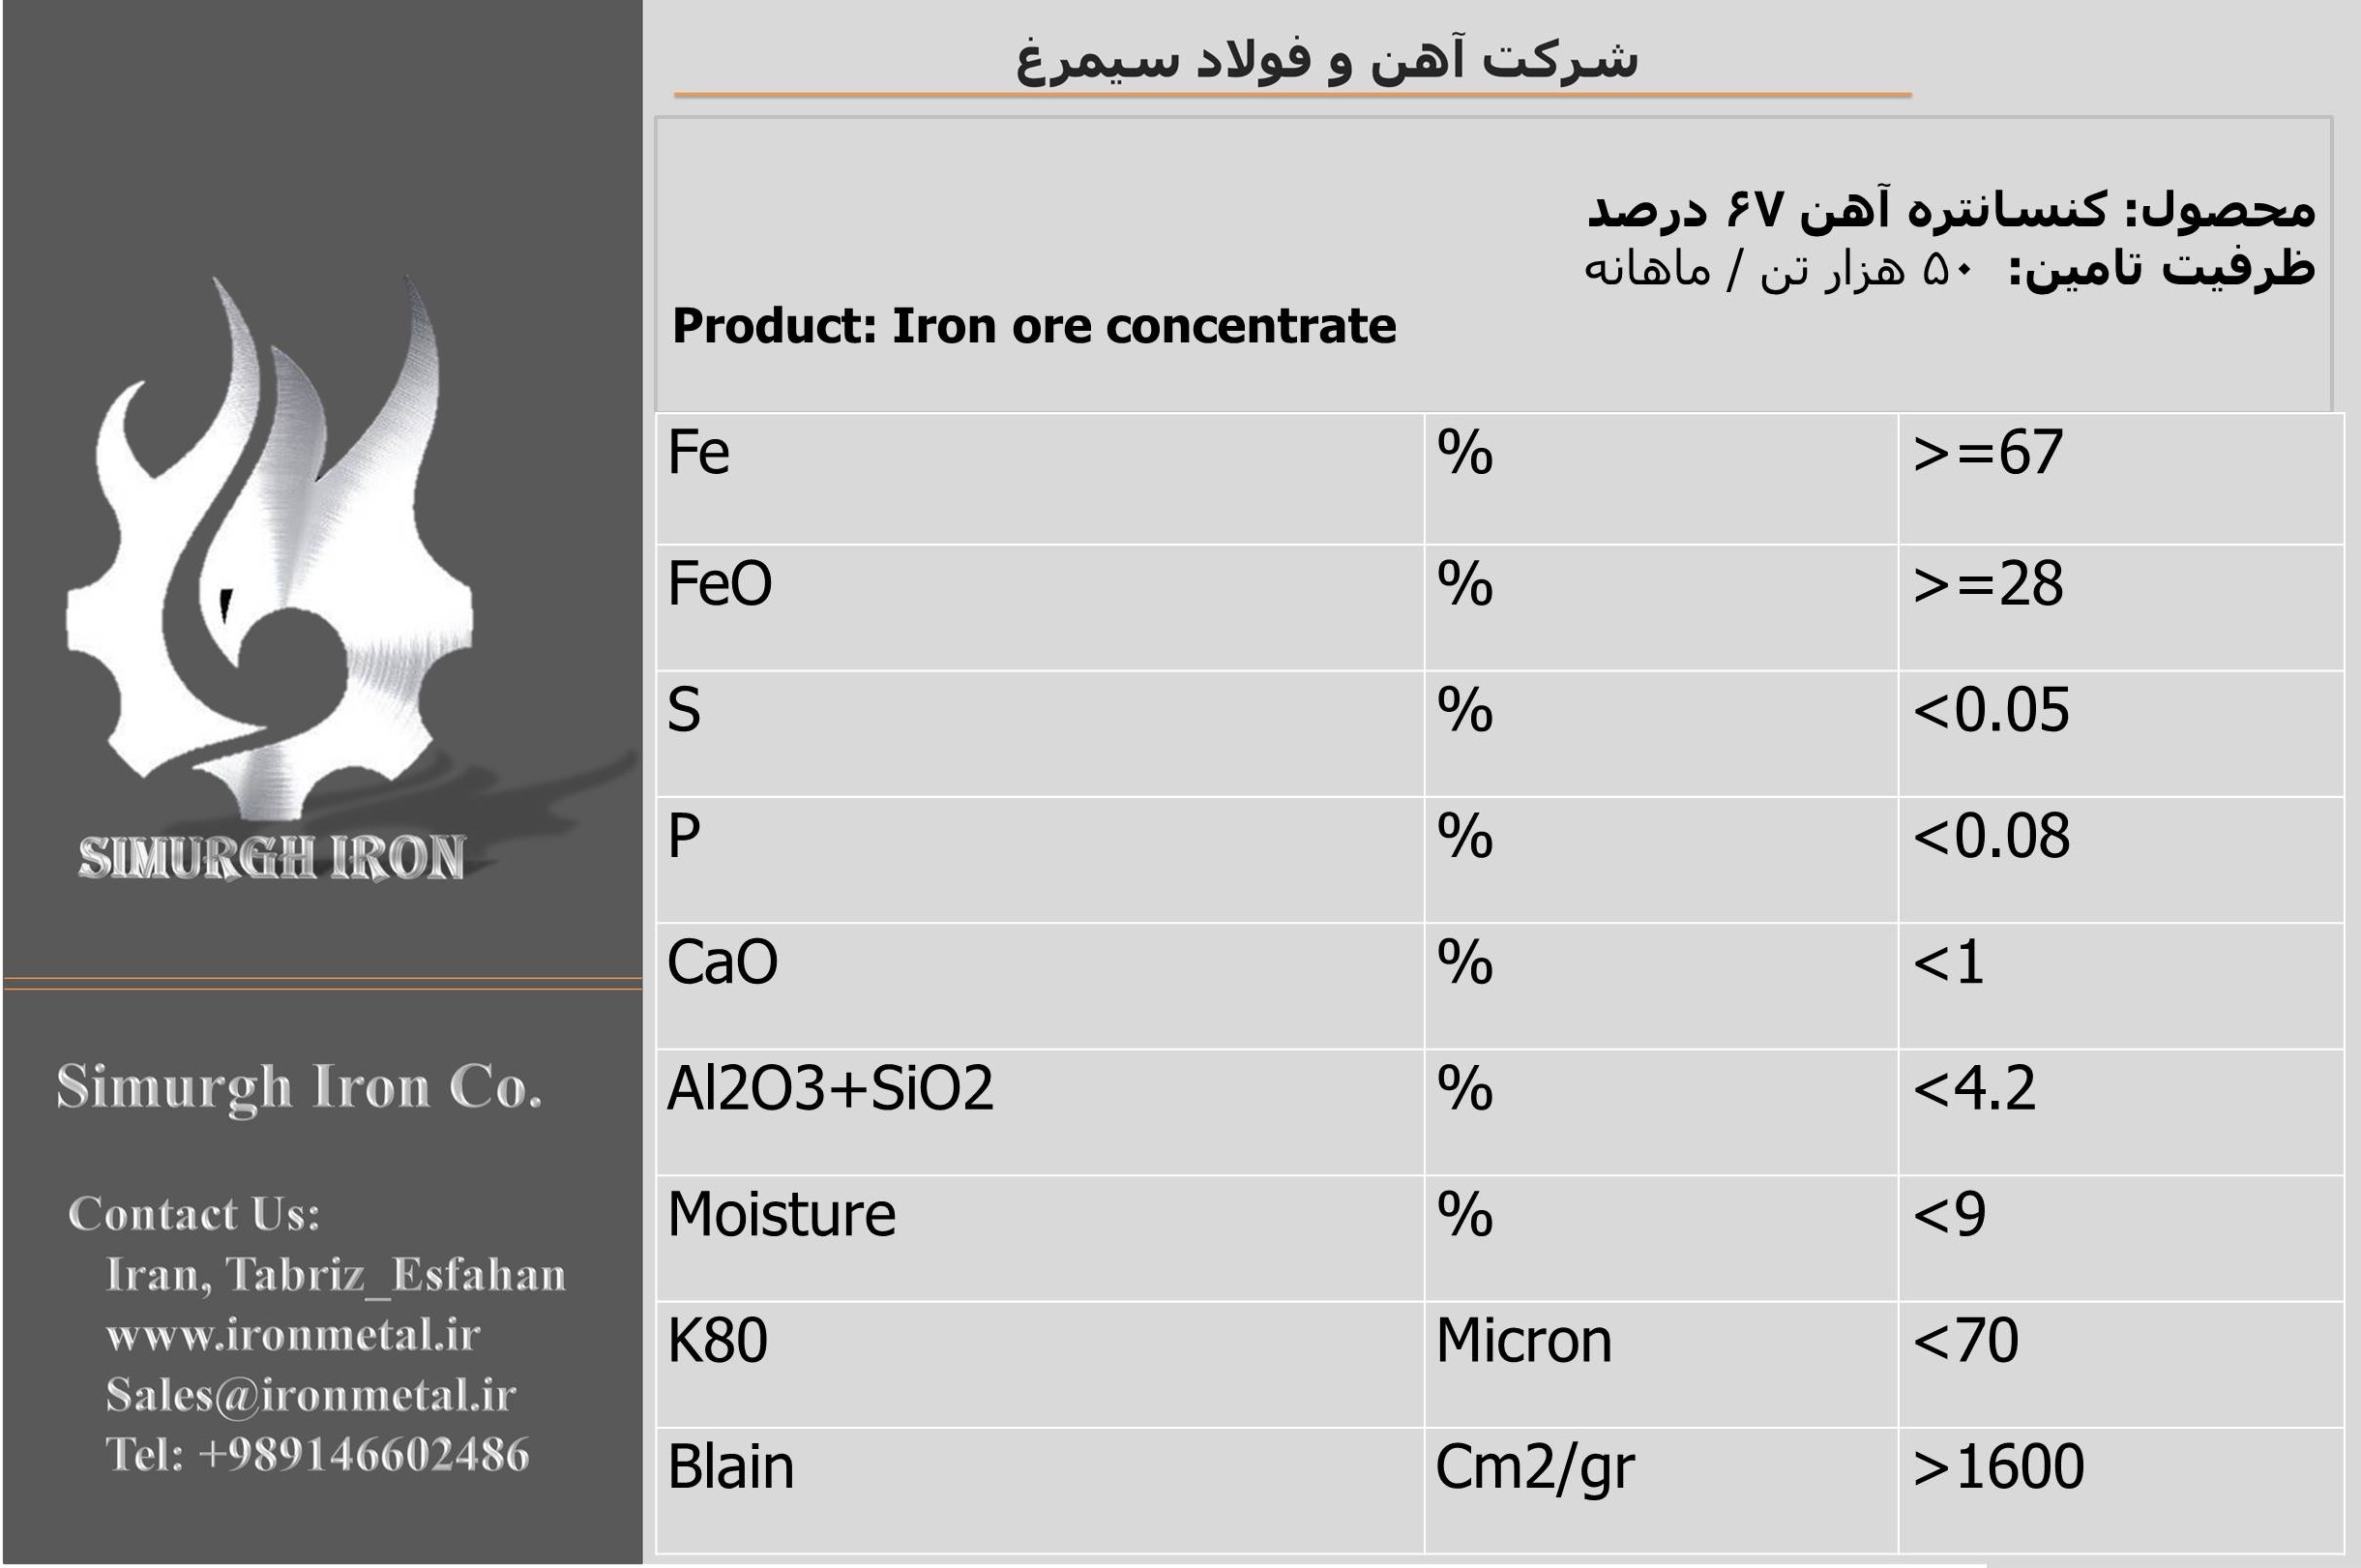 concentrate iron ore 67 fe price